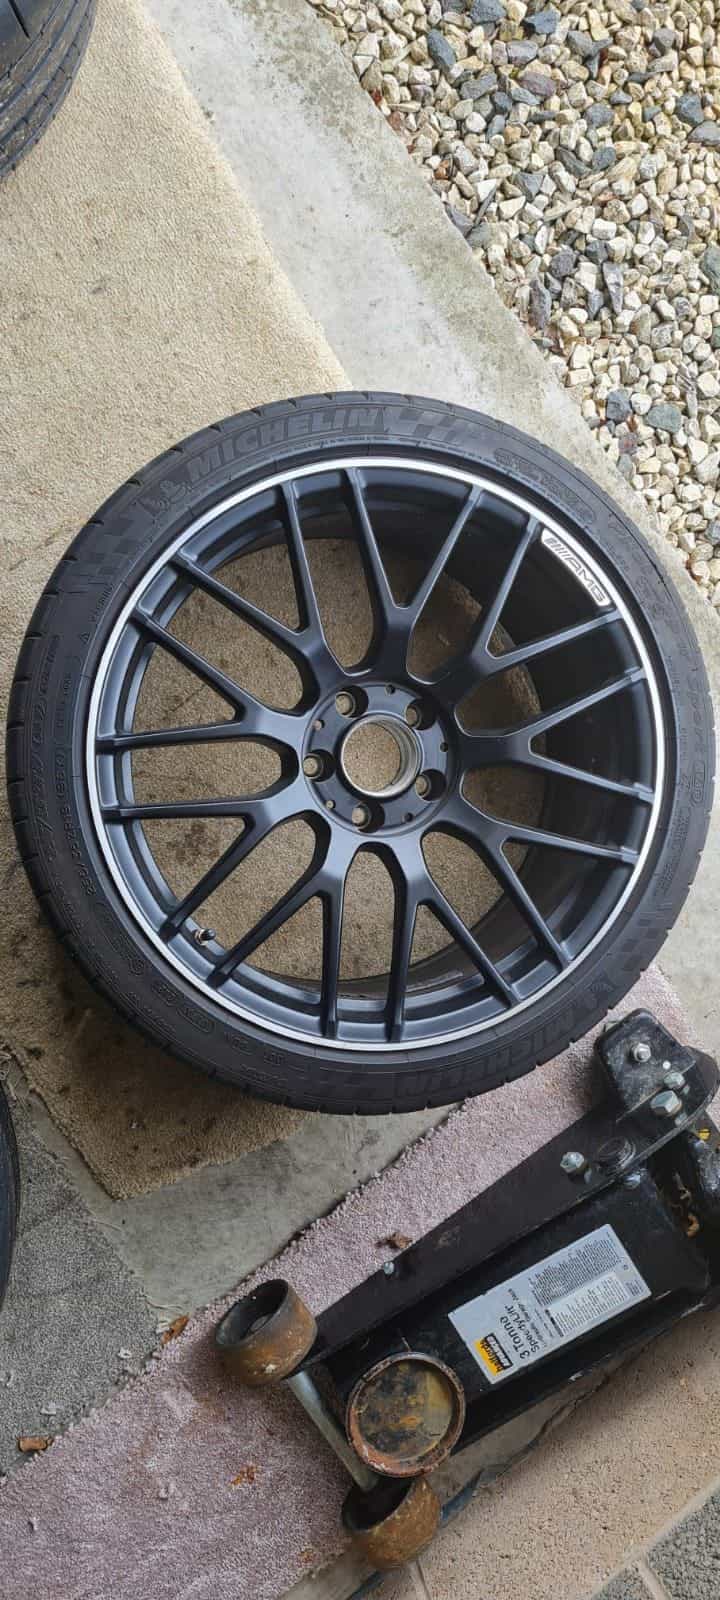 Wheels and Tires/Axles - Genuine 19/20 Forged Cross Spokes for Saloon/Estate - Used - 2015 to 2021 Mercedes-Benz C63 AMG S - Hinckley LE98GR, United Kingdom